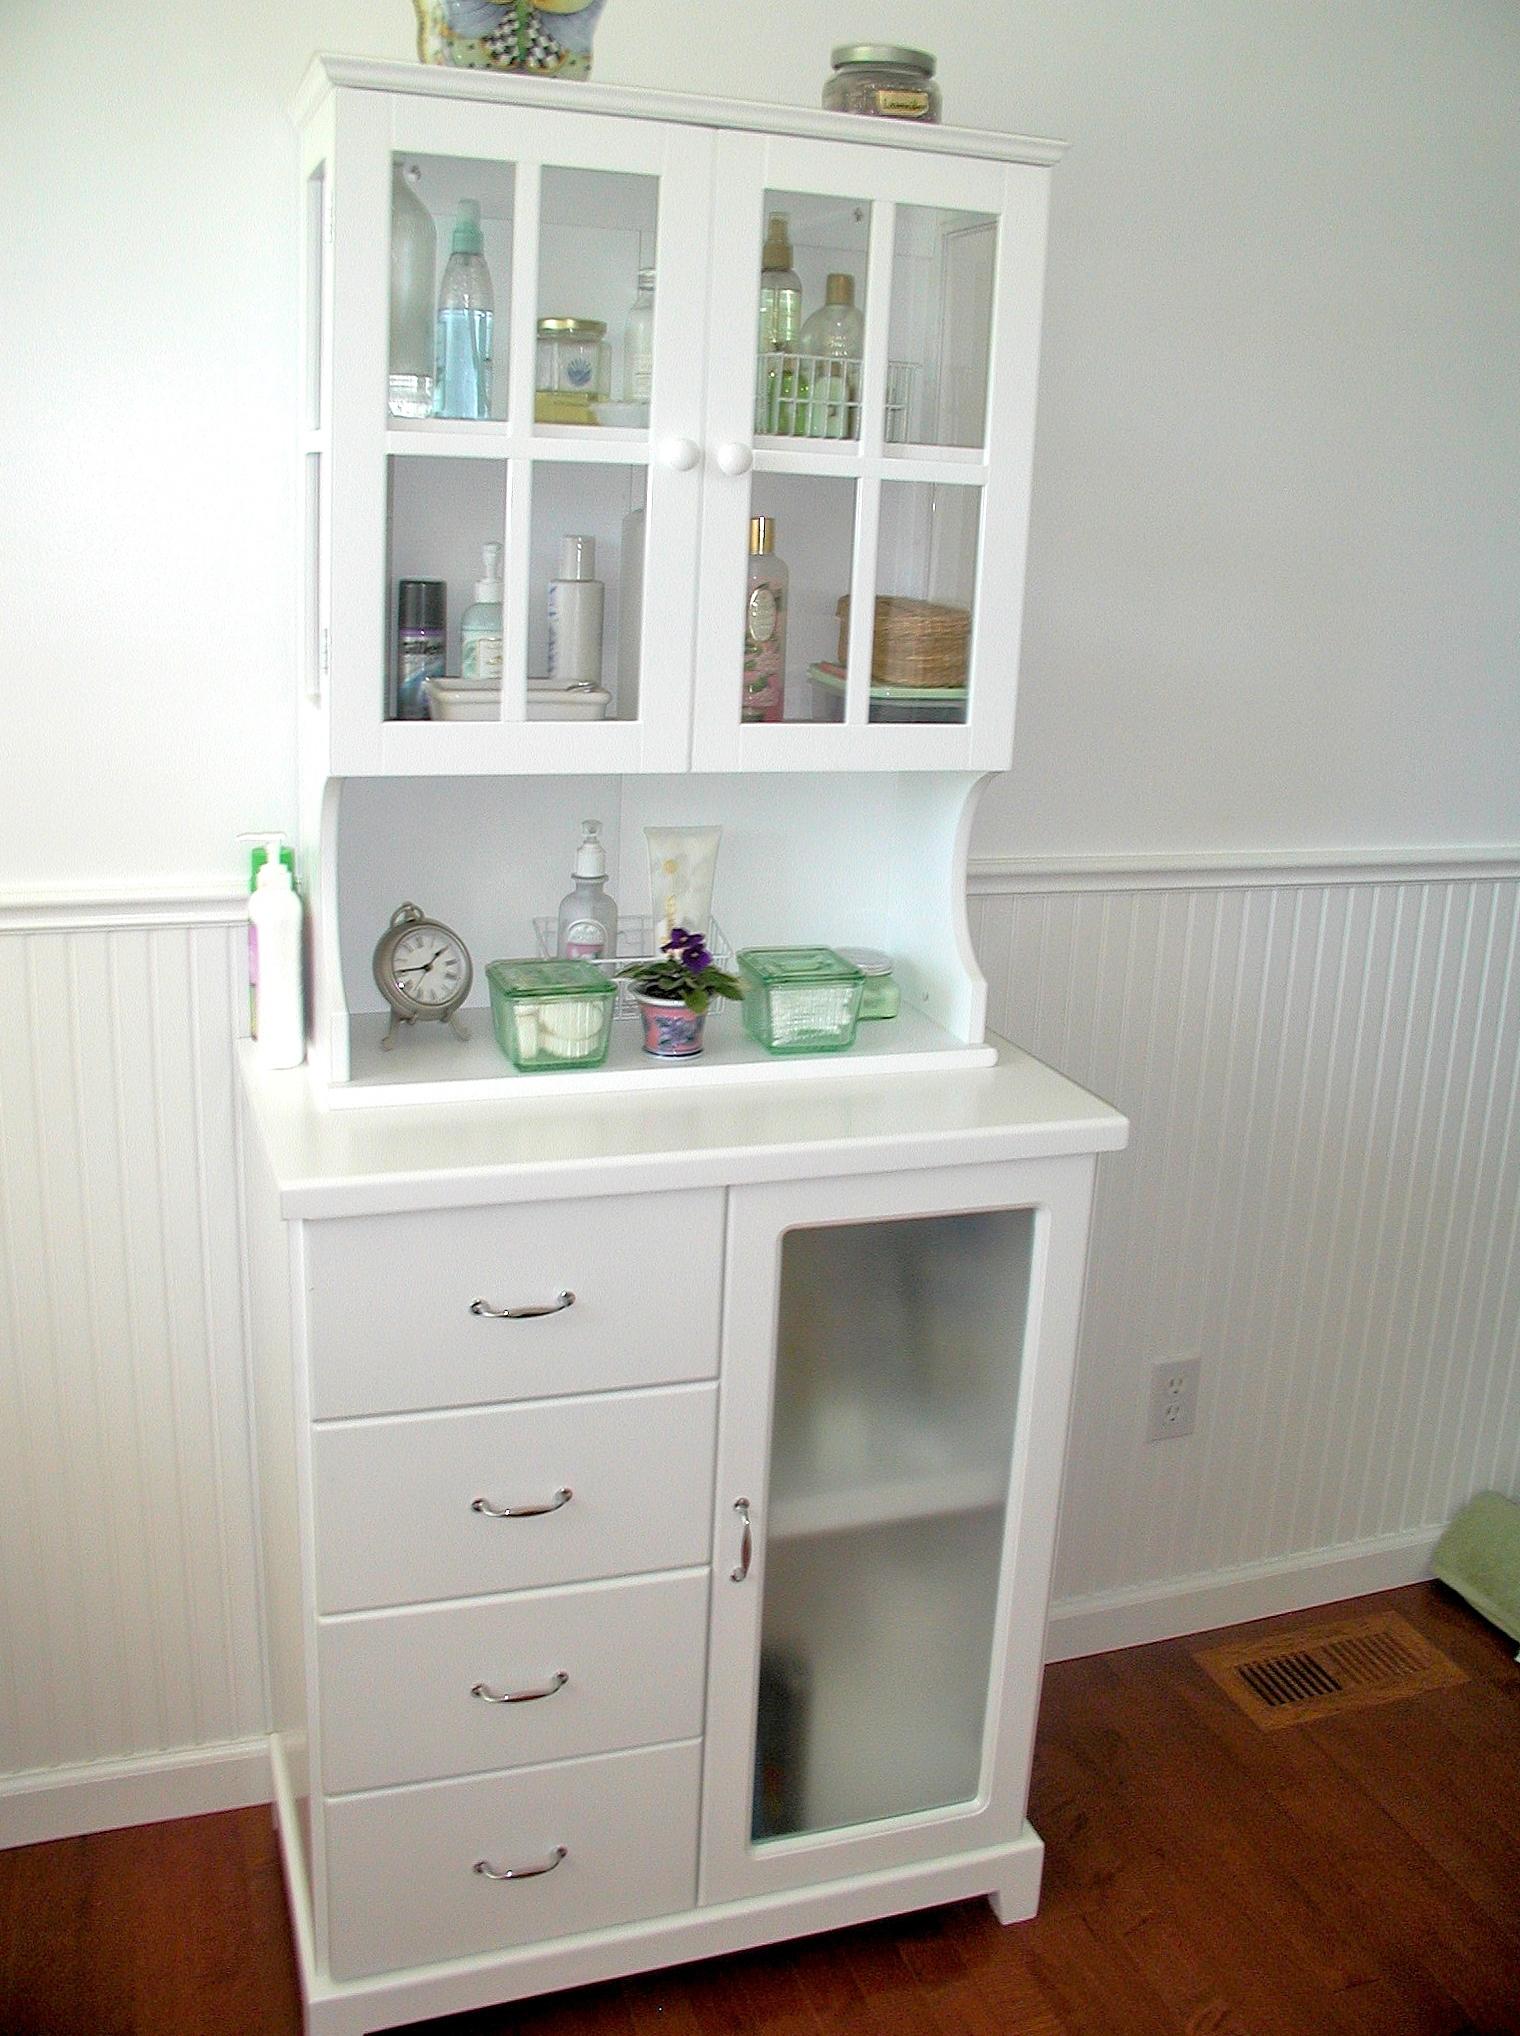 This refreshing space replaced two dingy little bathrooms. My customer envisioned a clean and sparkling space.